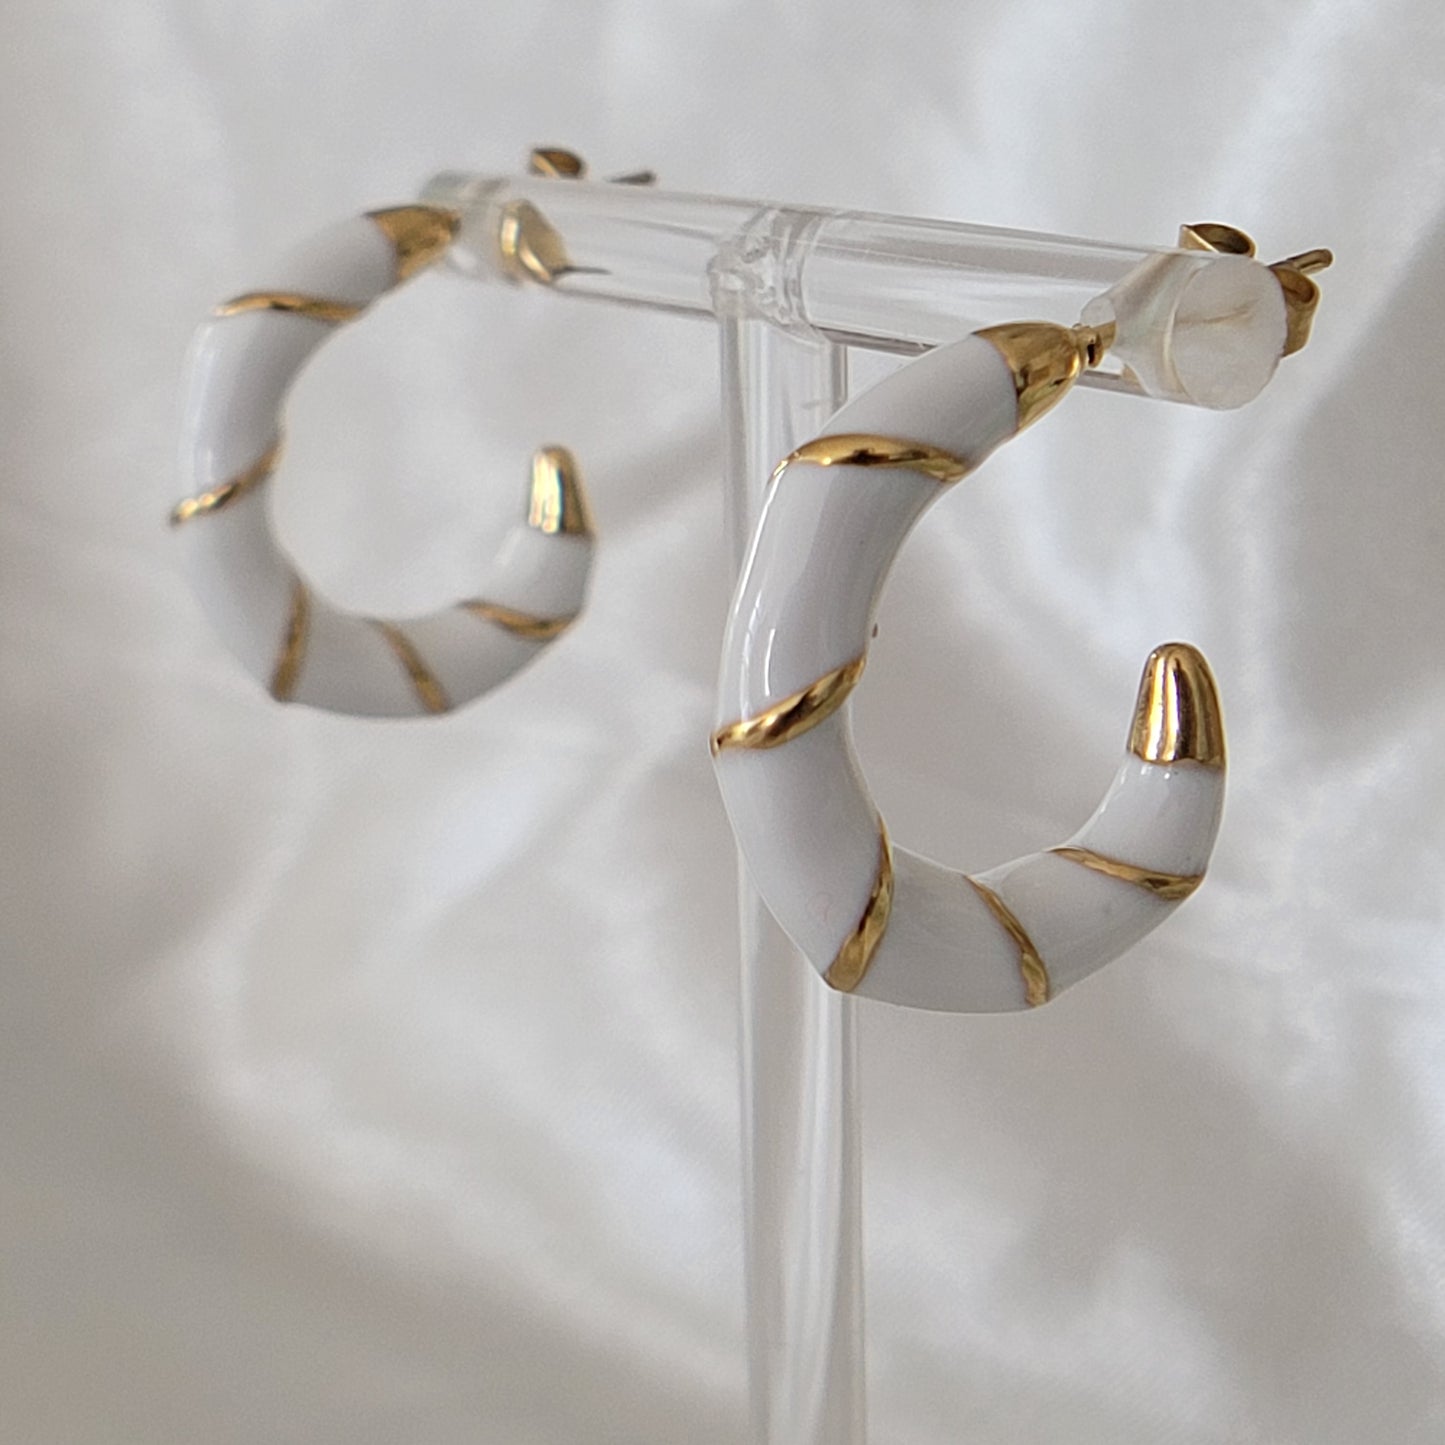 Strip Hoop Earring - Gold and White / Gold and Black